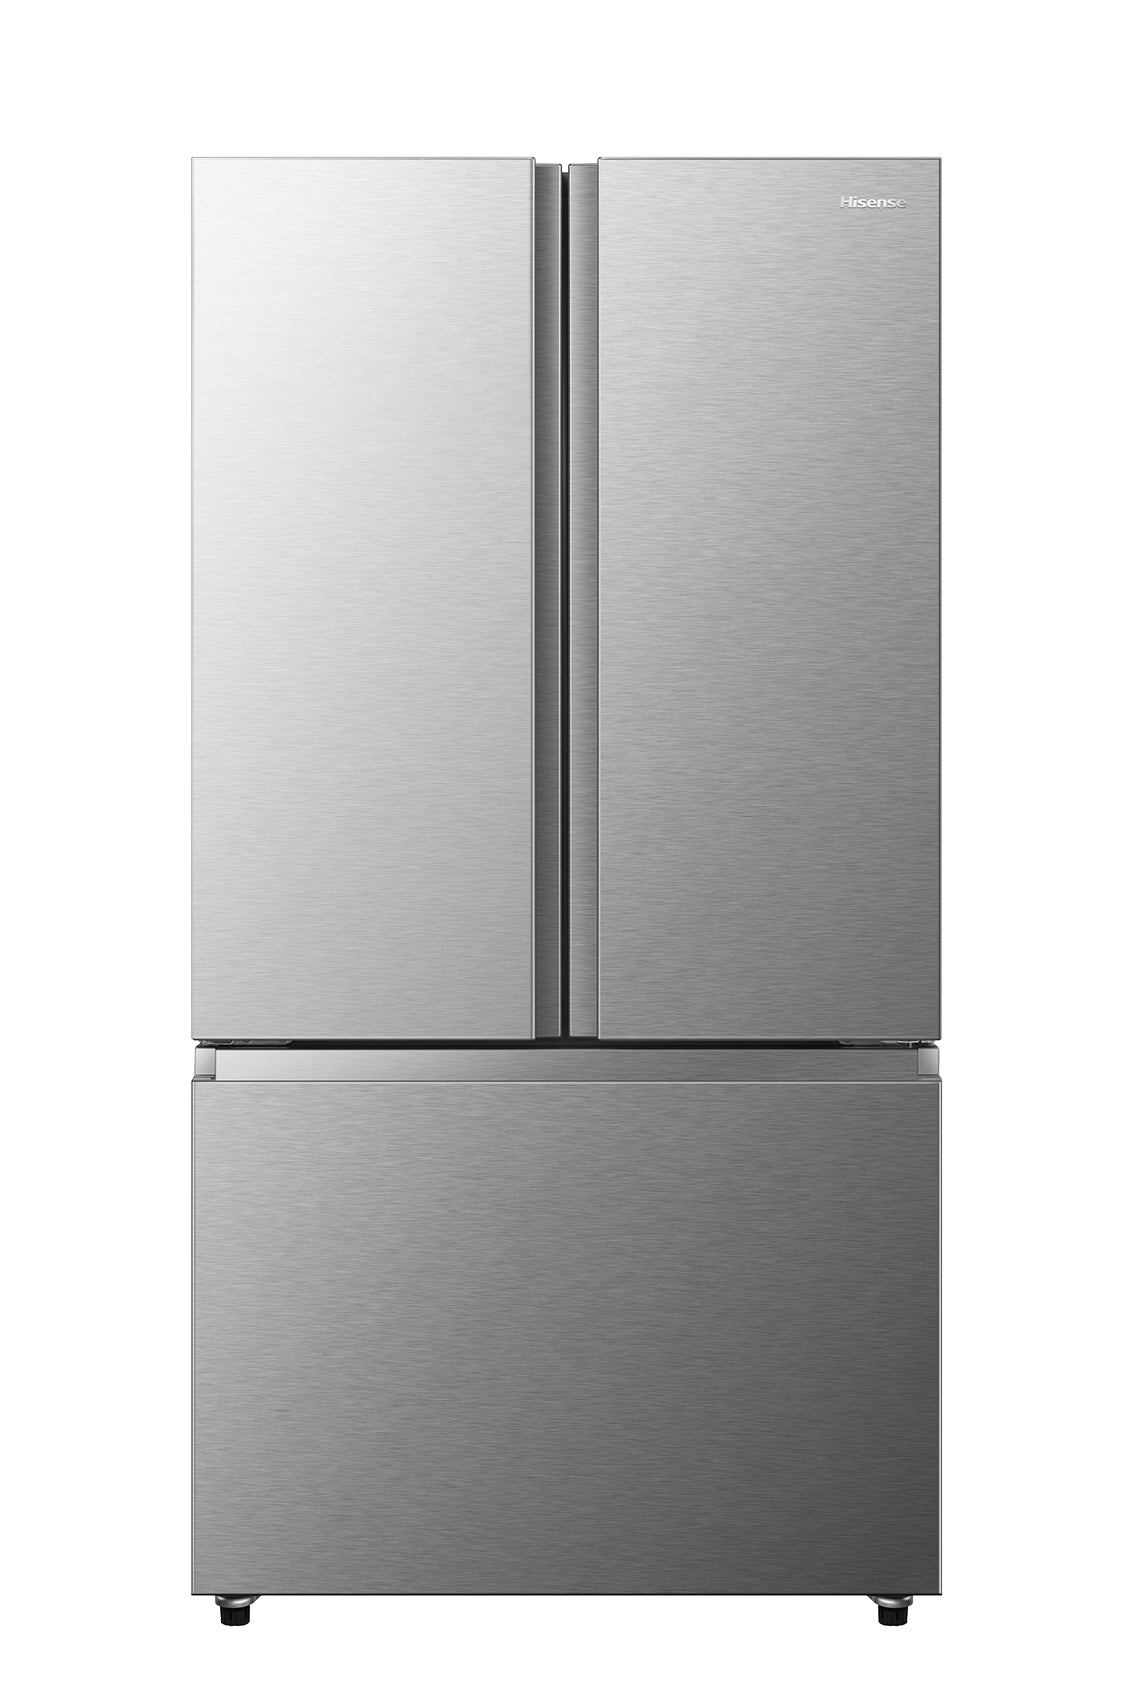 Hisense - 35.98 Inch 22.5 cu. ft French Door Refrigerator in Stainless - RF225A3CSE